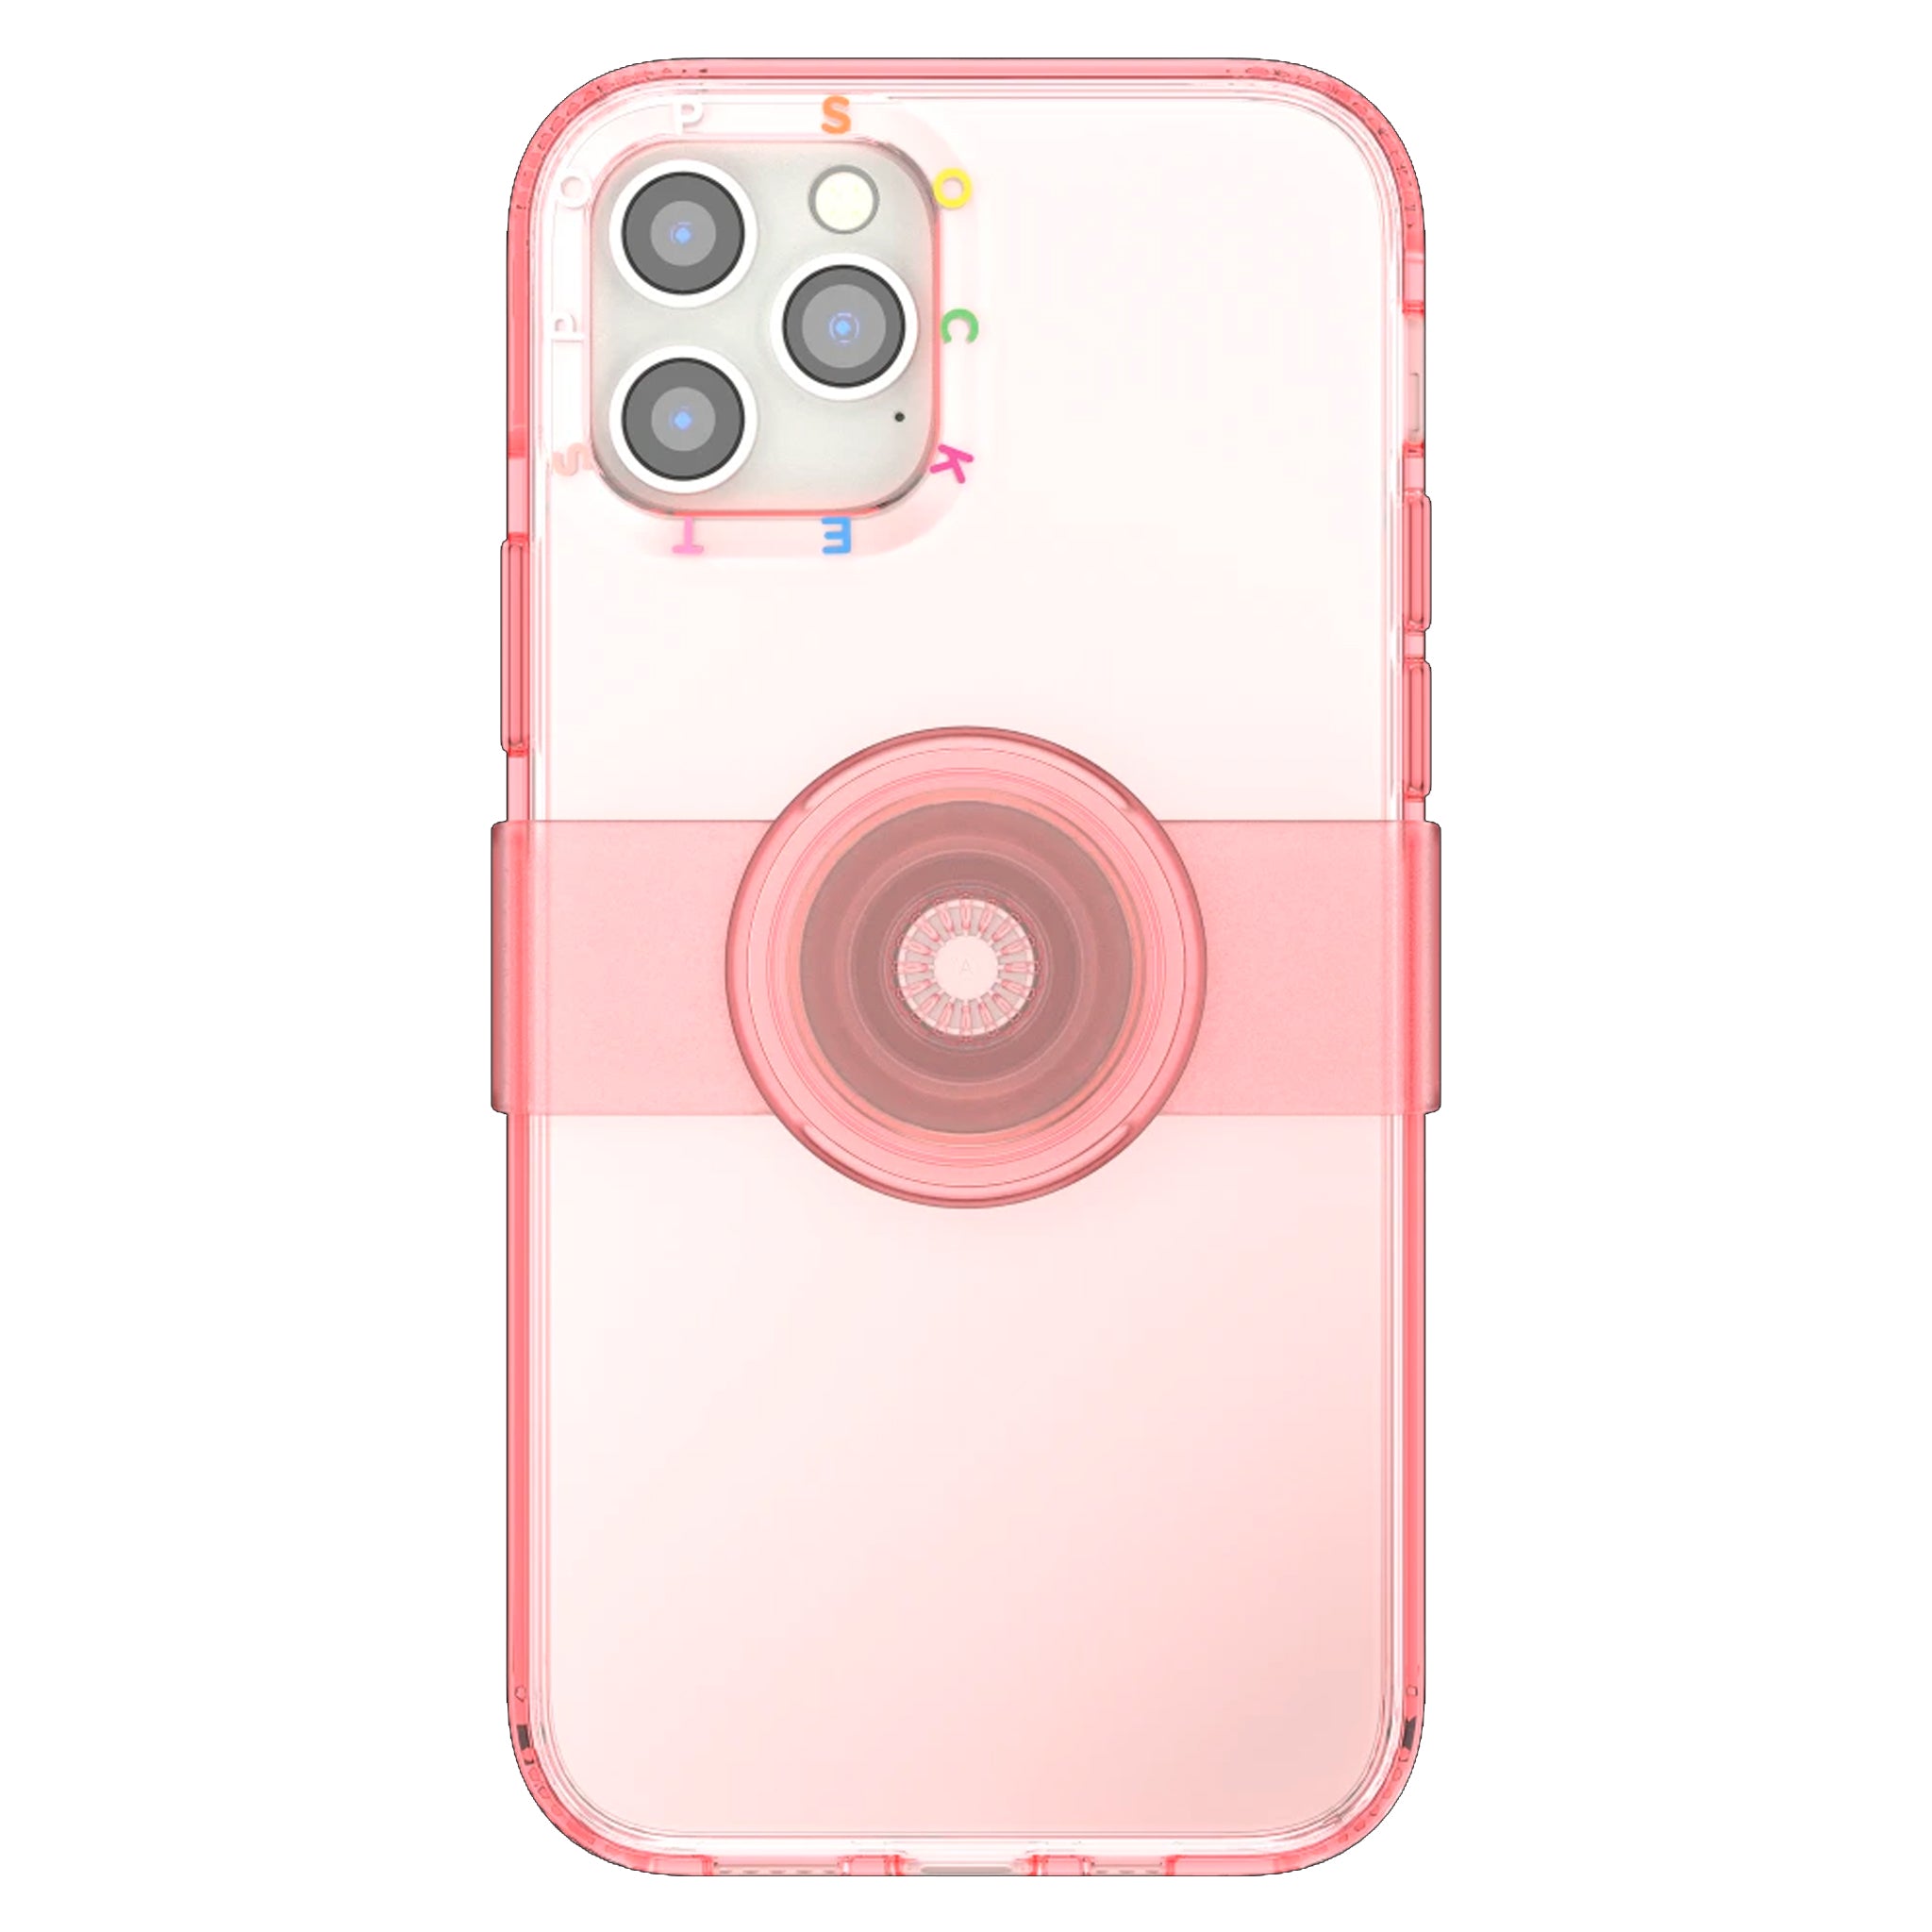 Popsockets - Popgrip Slide Case For Apple Iphone 12 / 12 Pro - Peachy